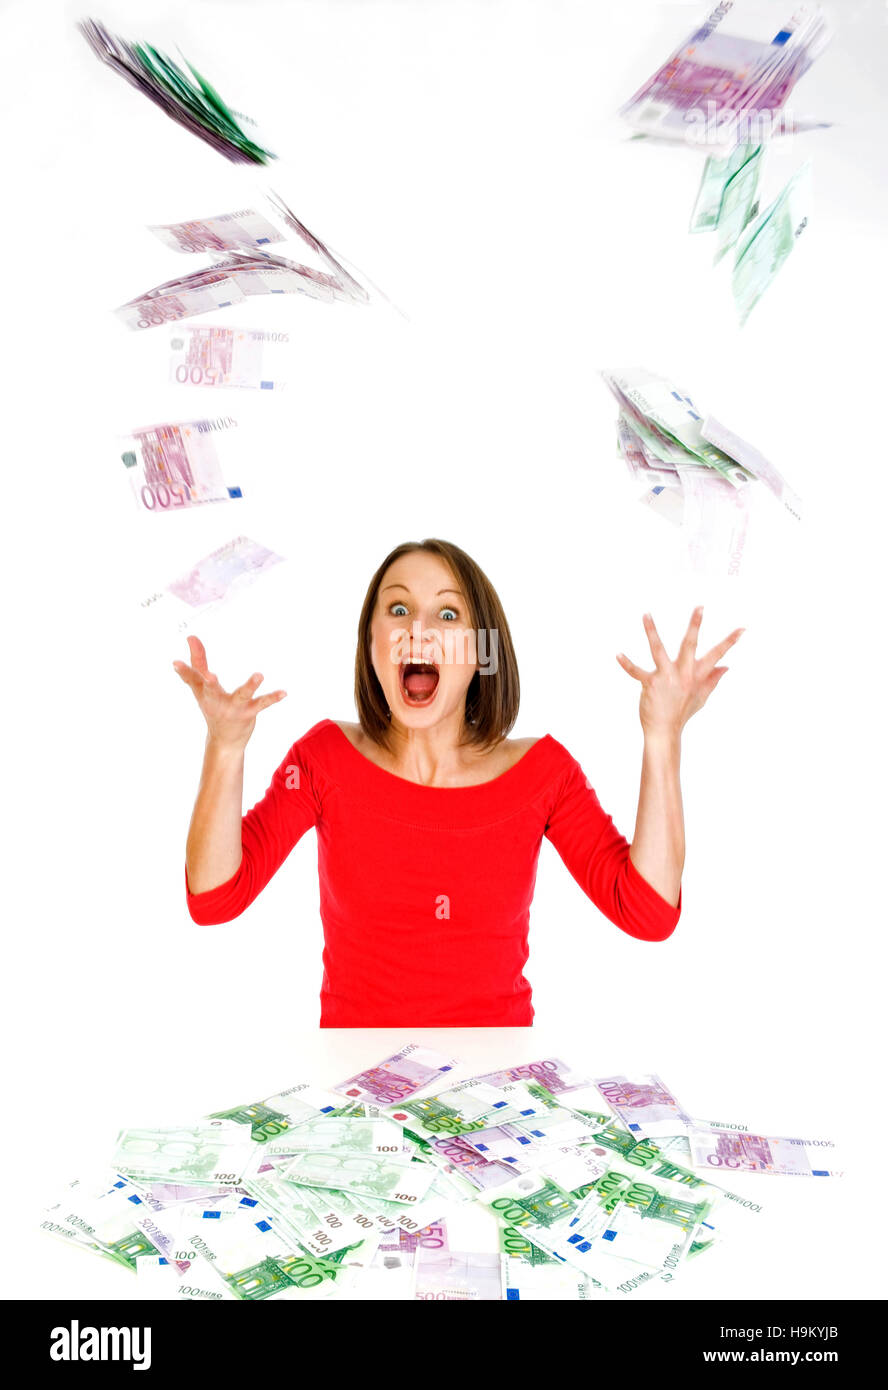 Young woman throwing money Stock Photo